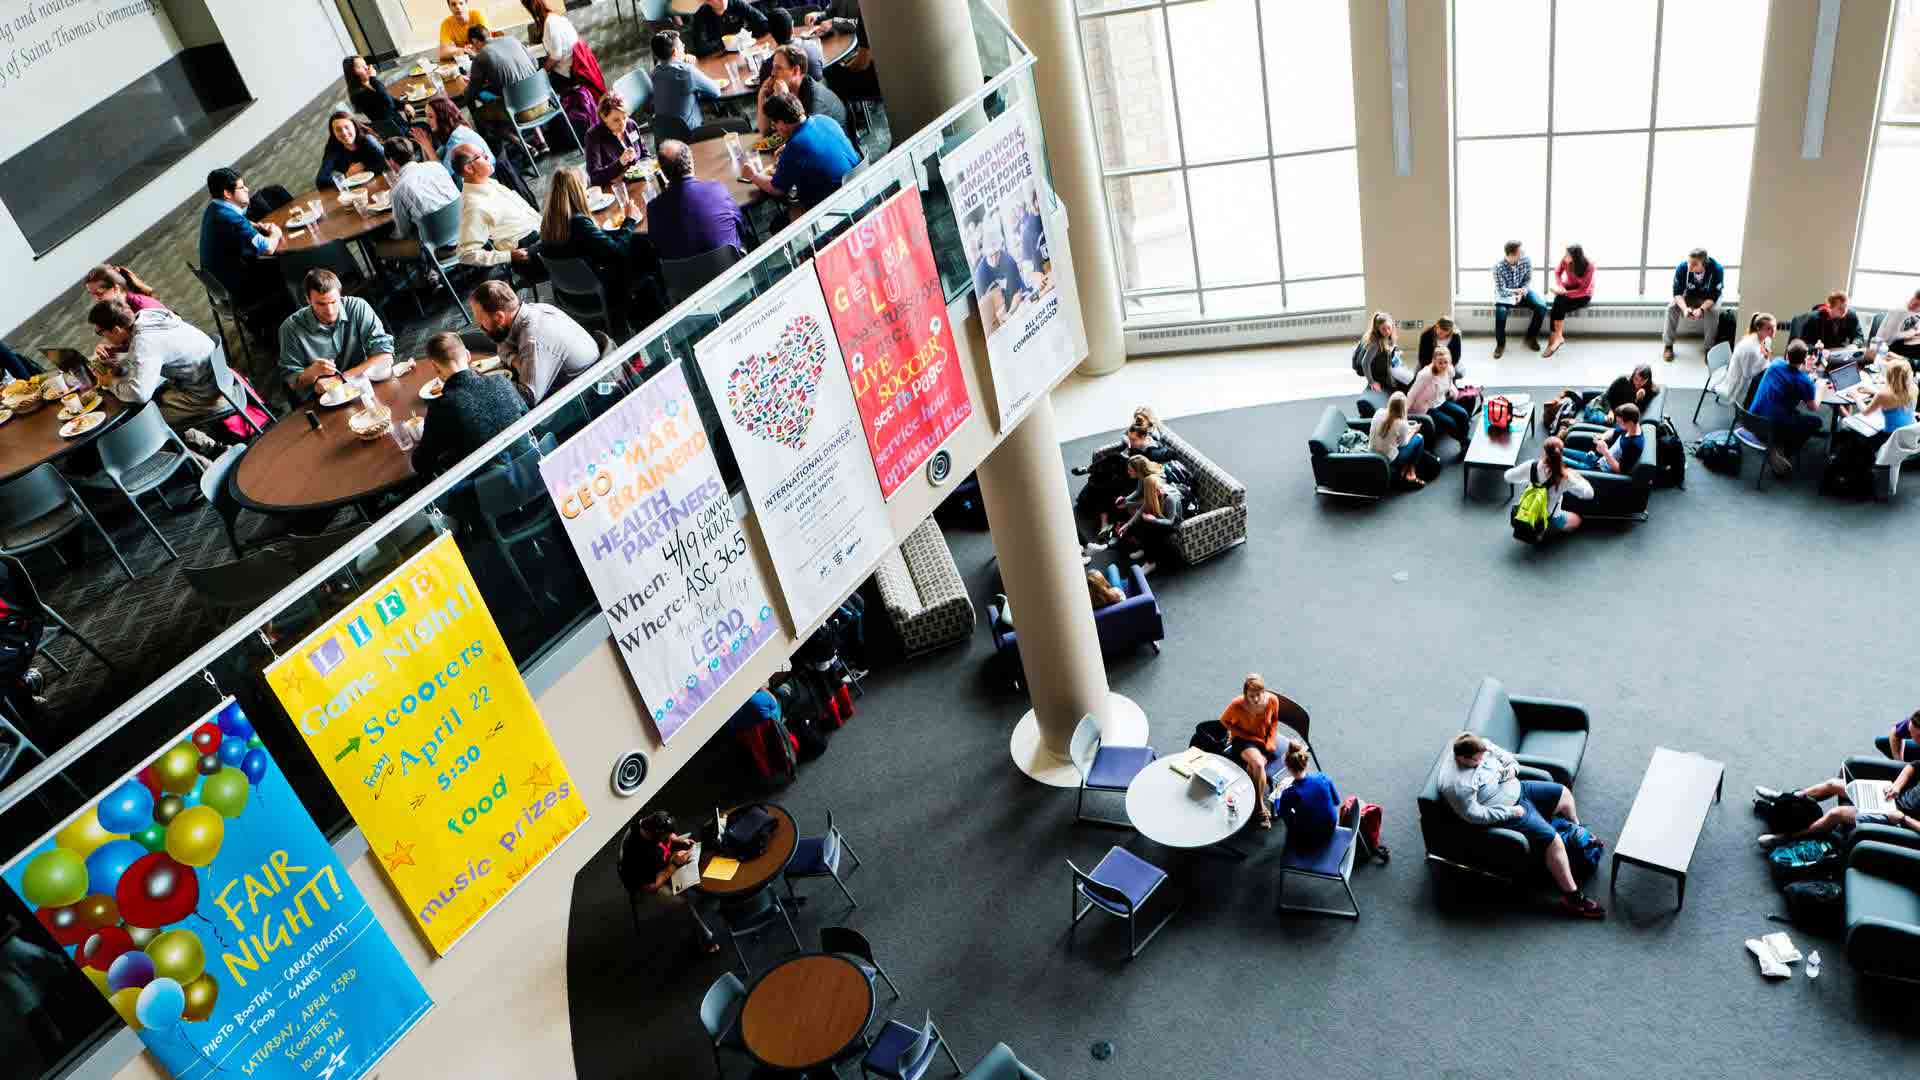 an image of the Anderson Student Center atrium from the top floor